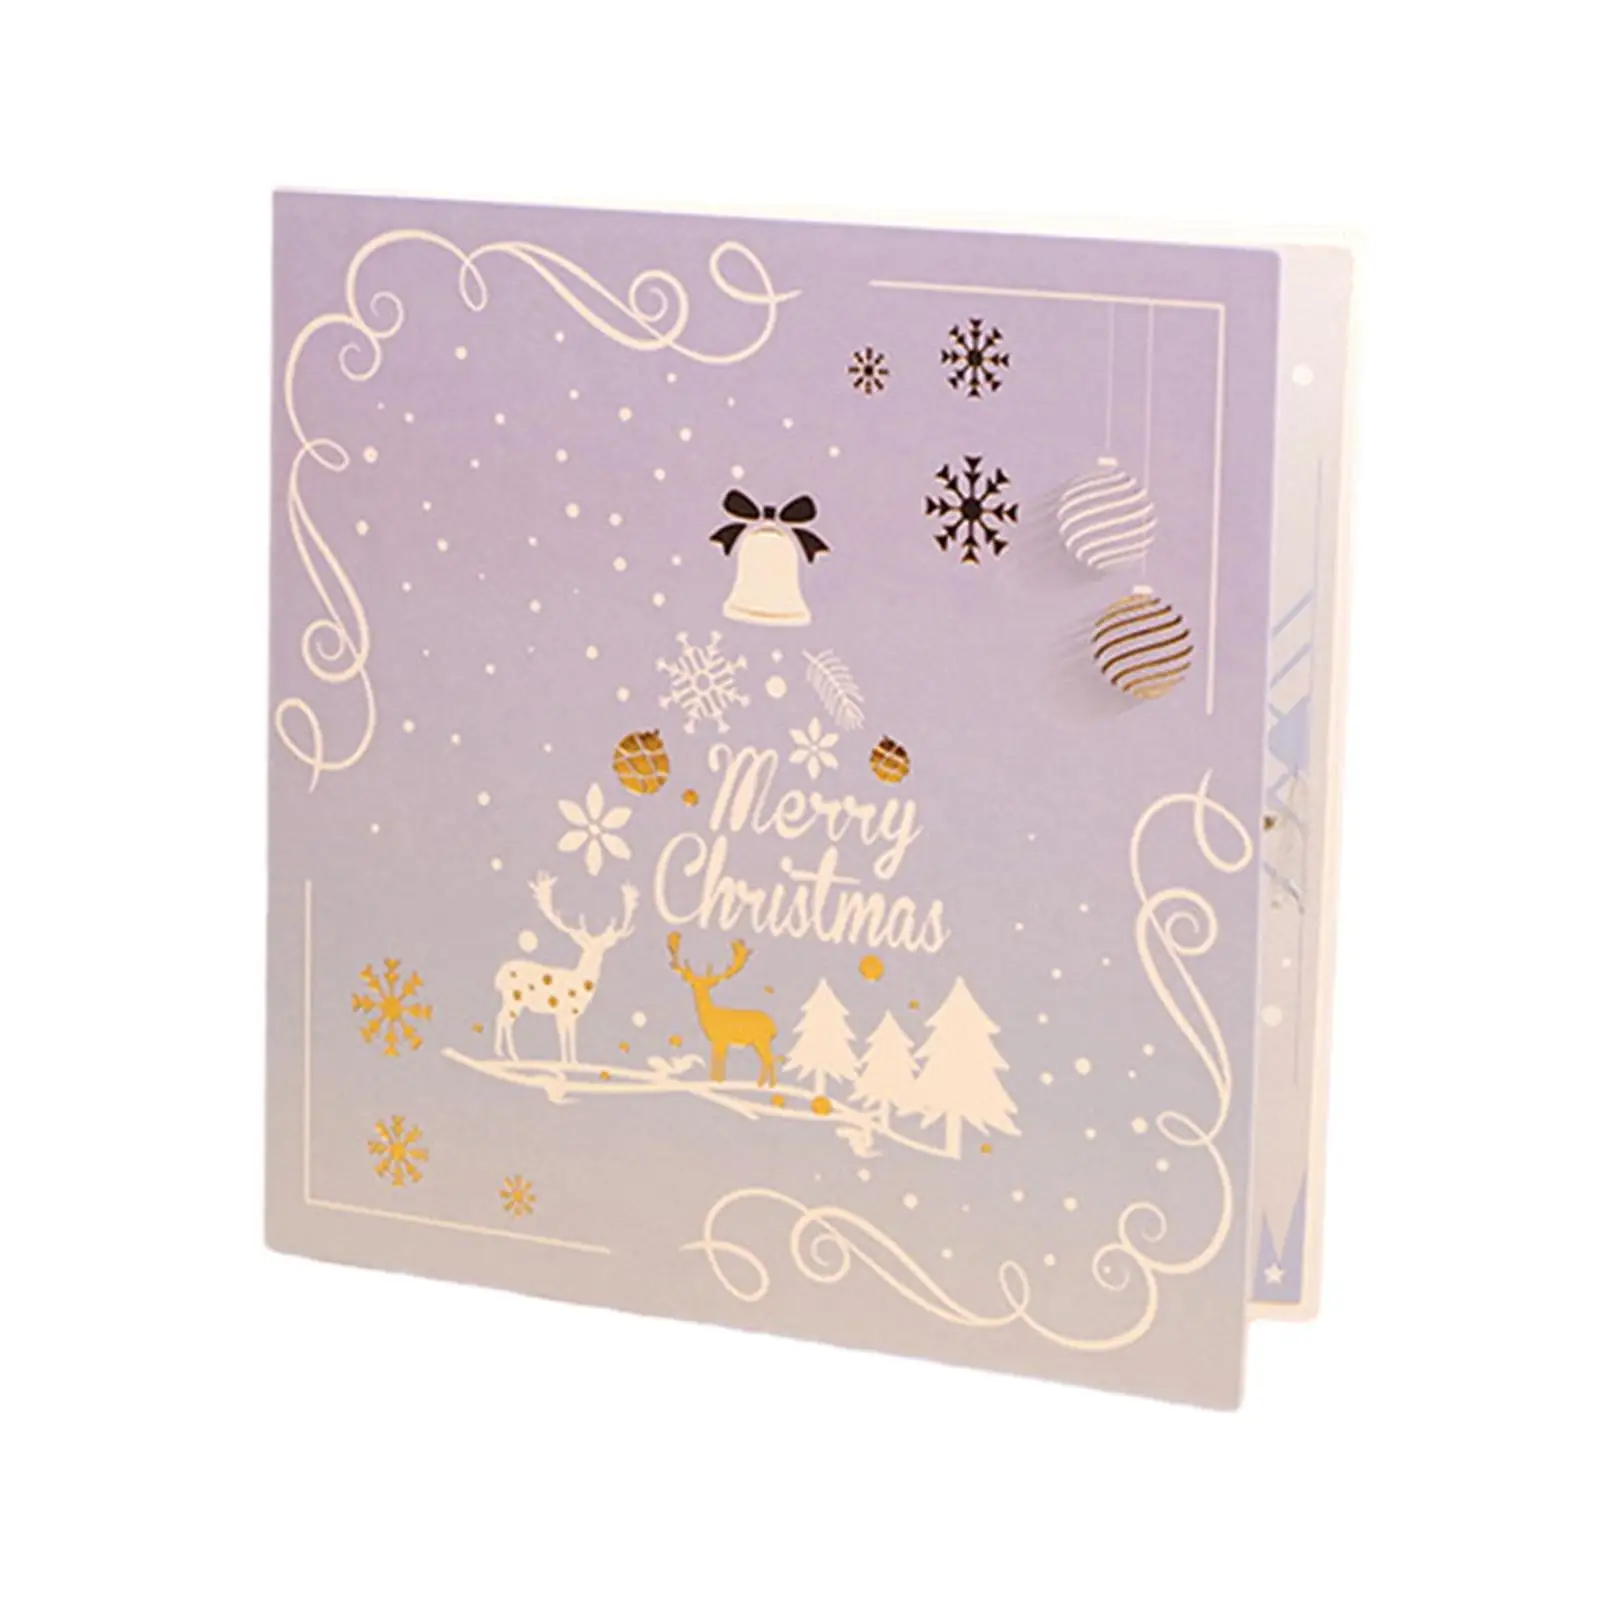 Xmas Greeting Card Popup Christmas Greeting Card for Friend New Year Mum